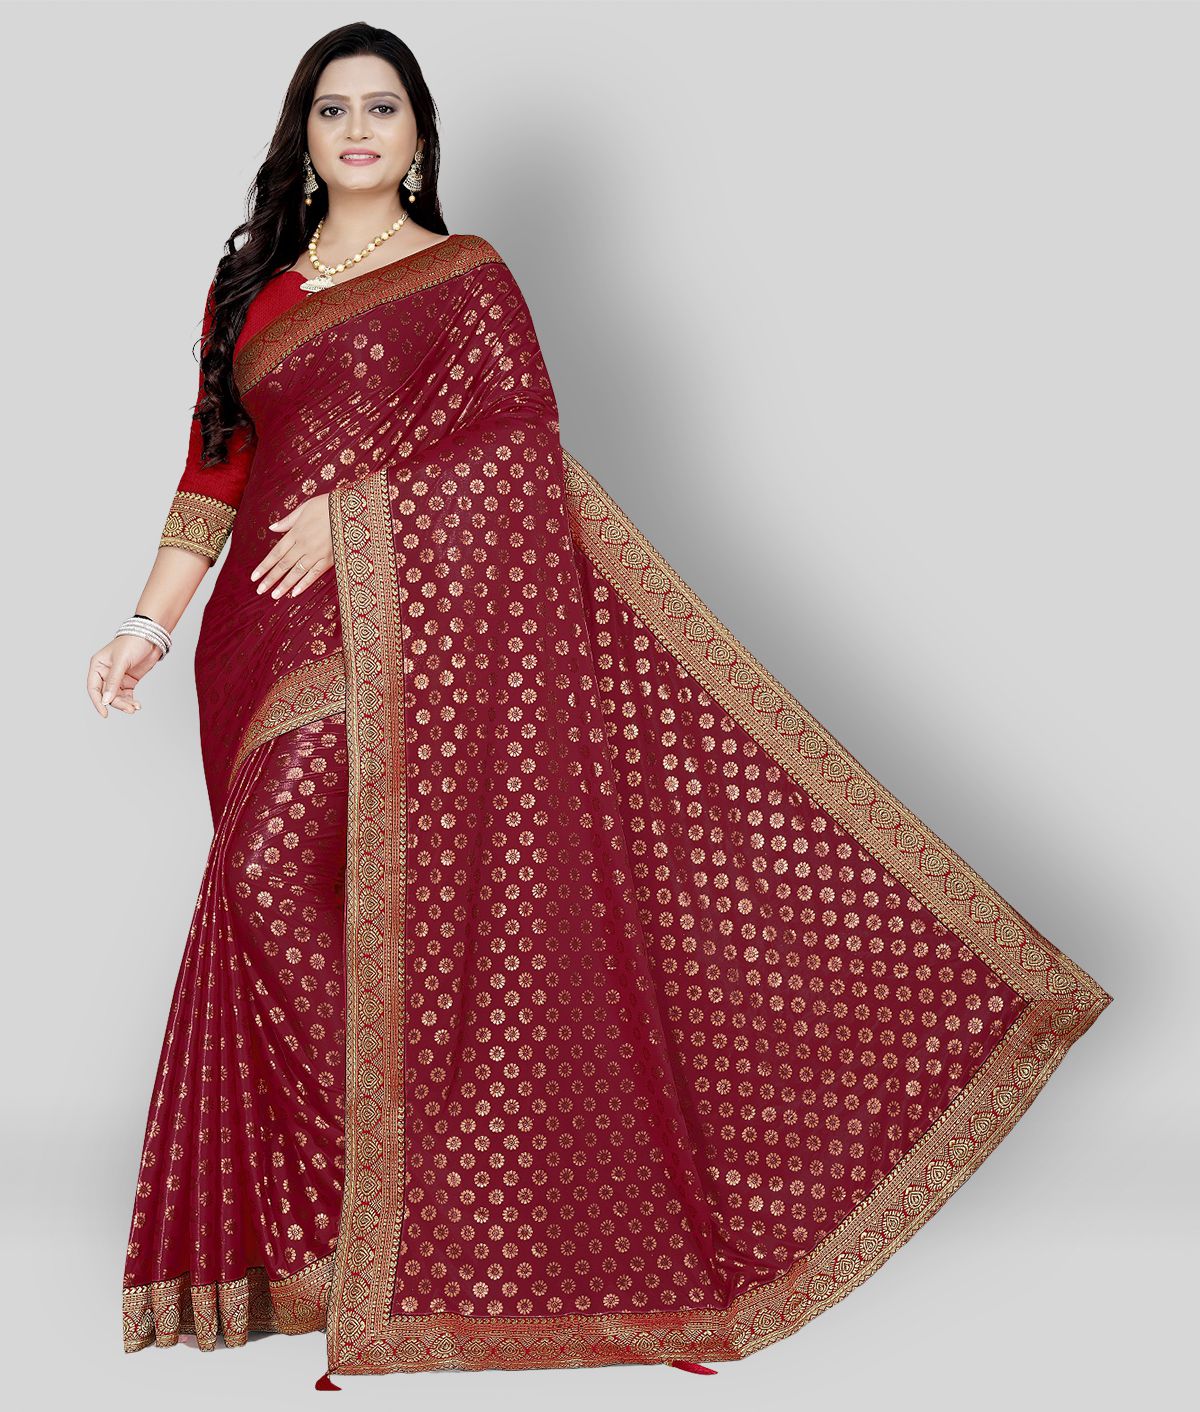     			Gazal Fashions - Maroon Lycra Saree With Blouse Piece (Pack of 1)